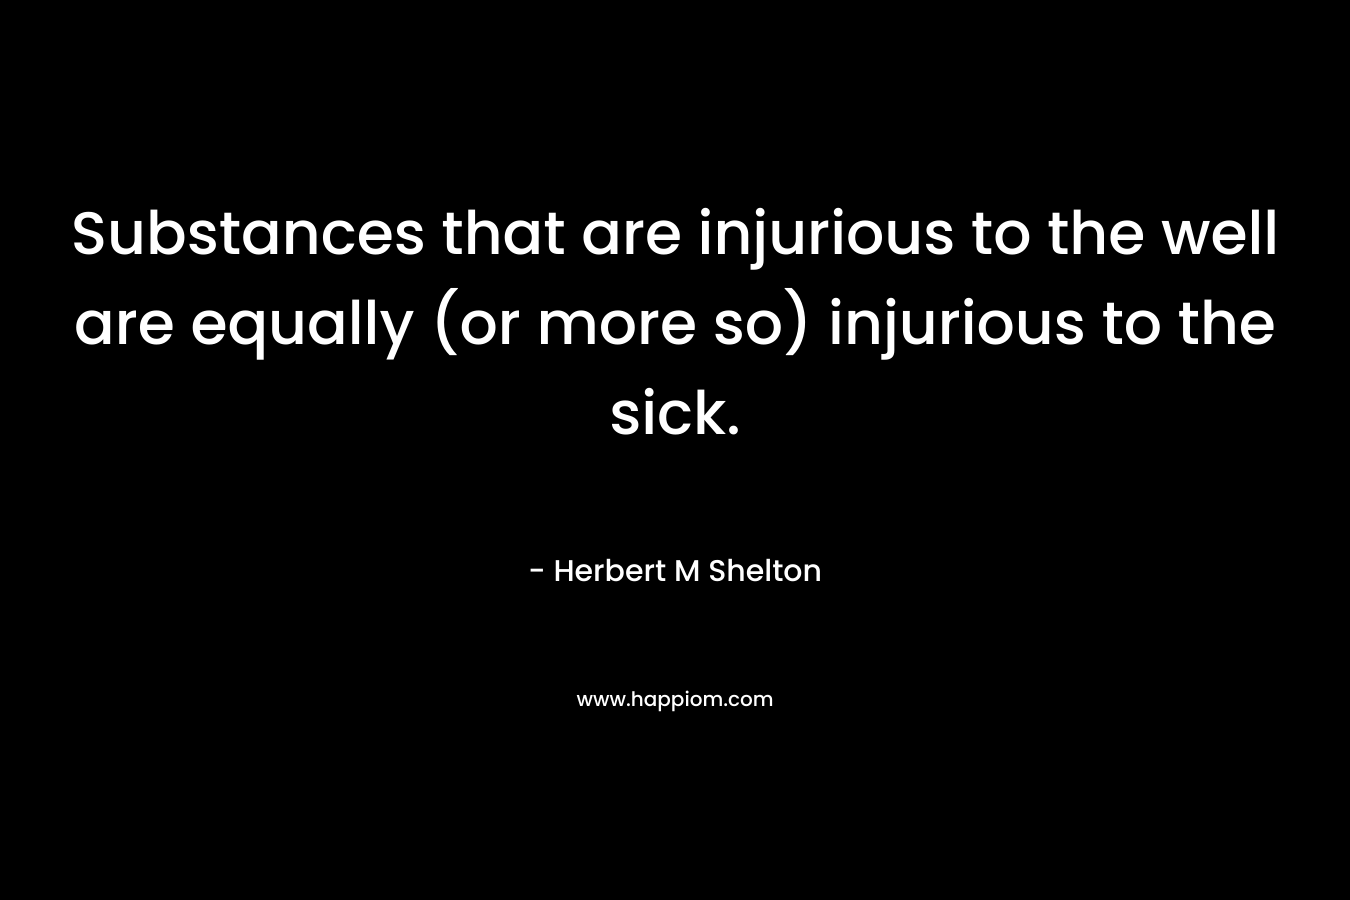 Substances that are injurious to the well are equally (or more so) injurious to the sick. – Herbert M Shelton